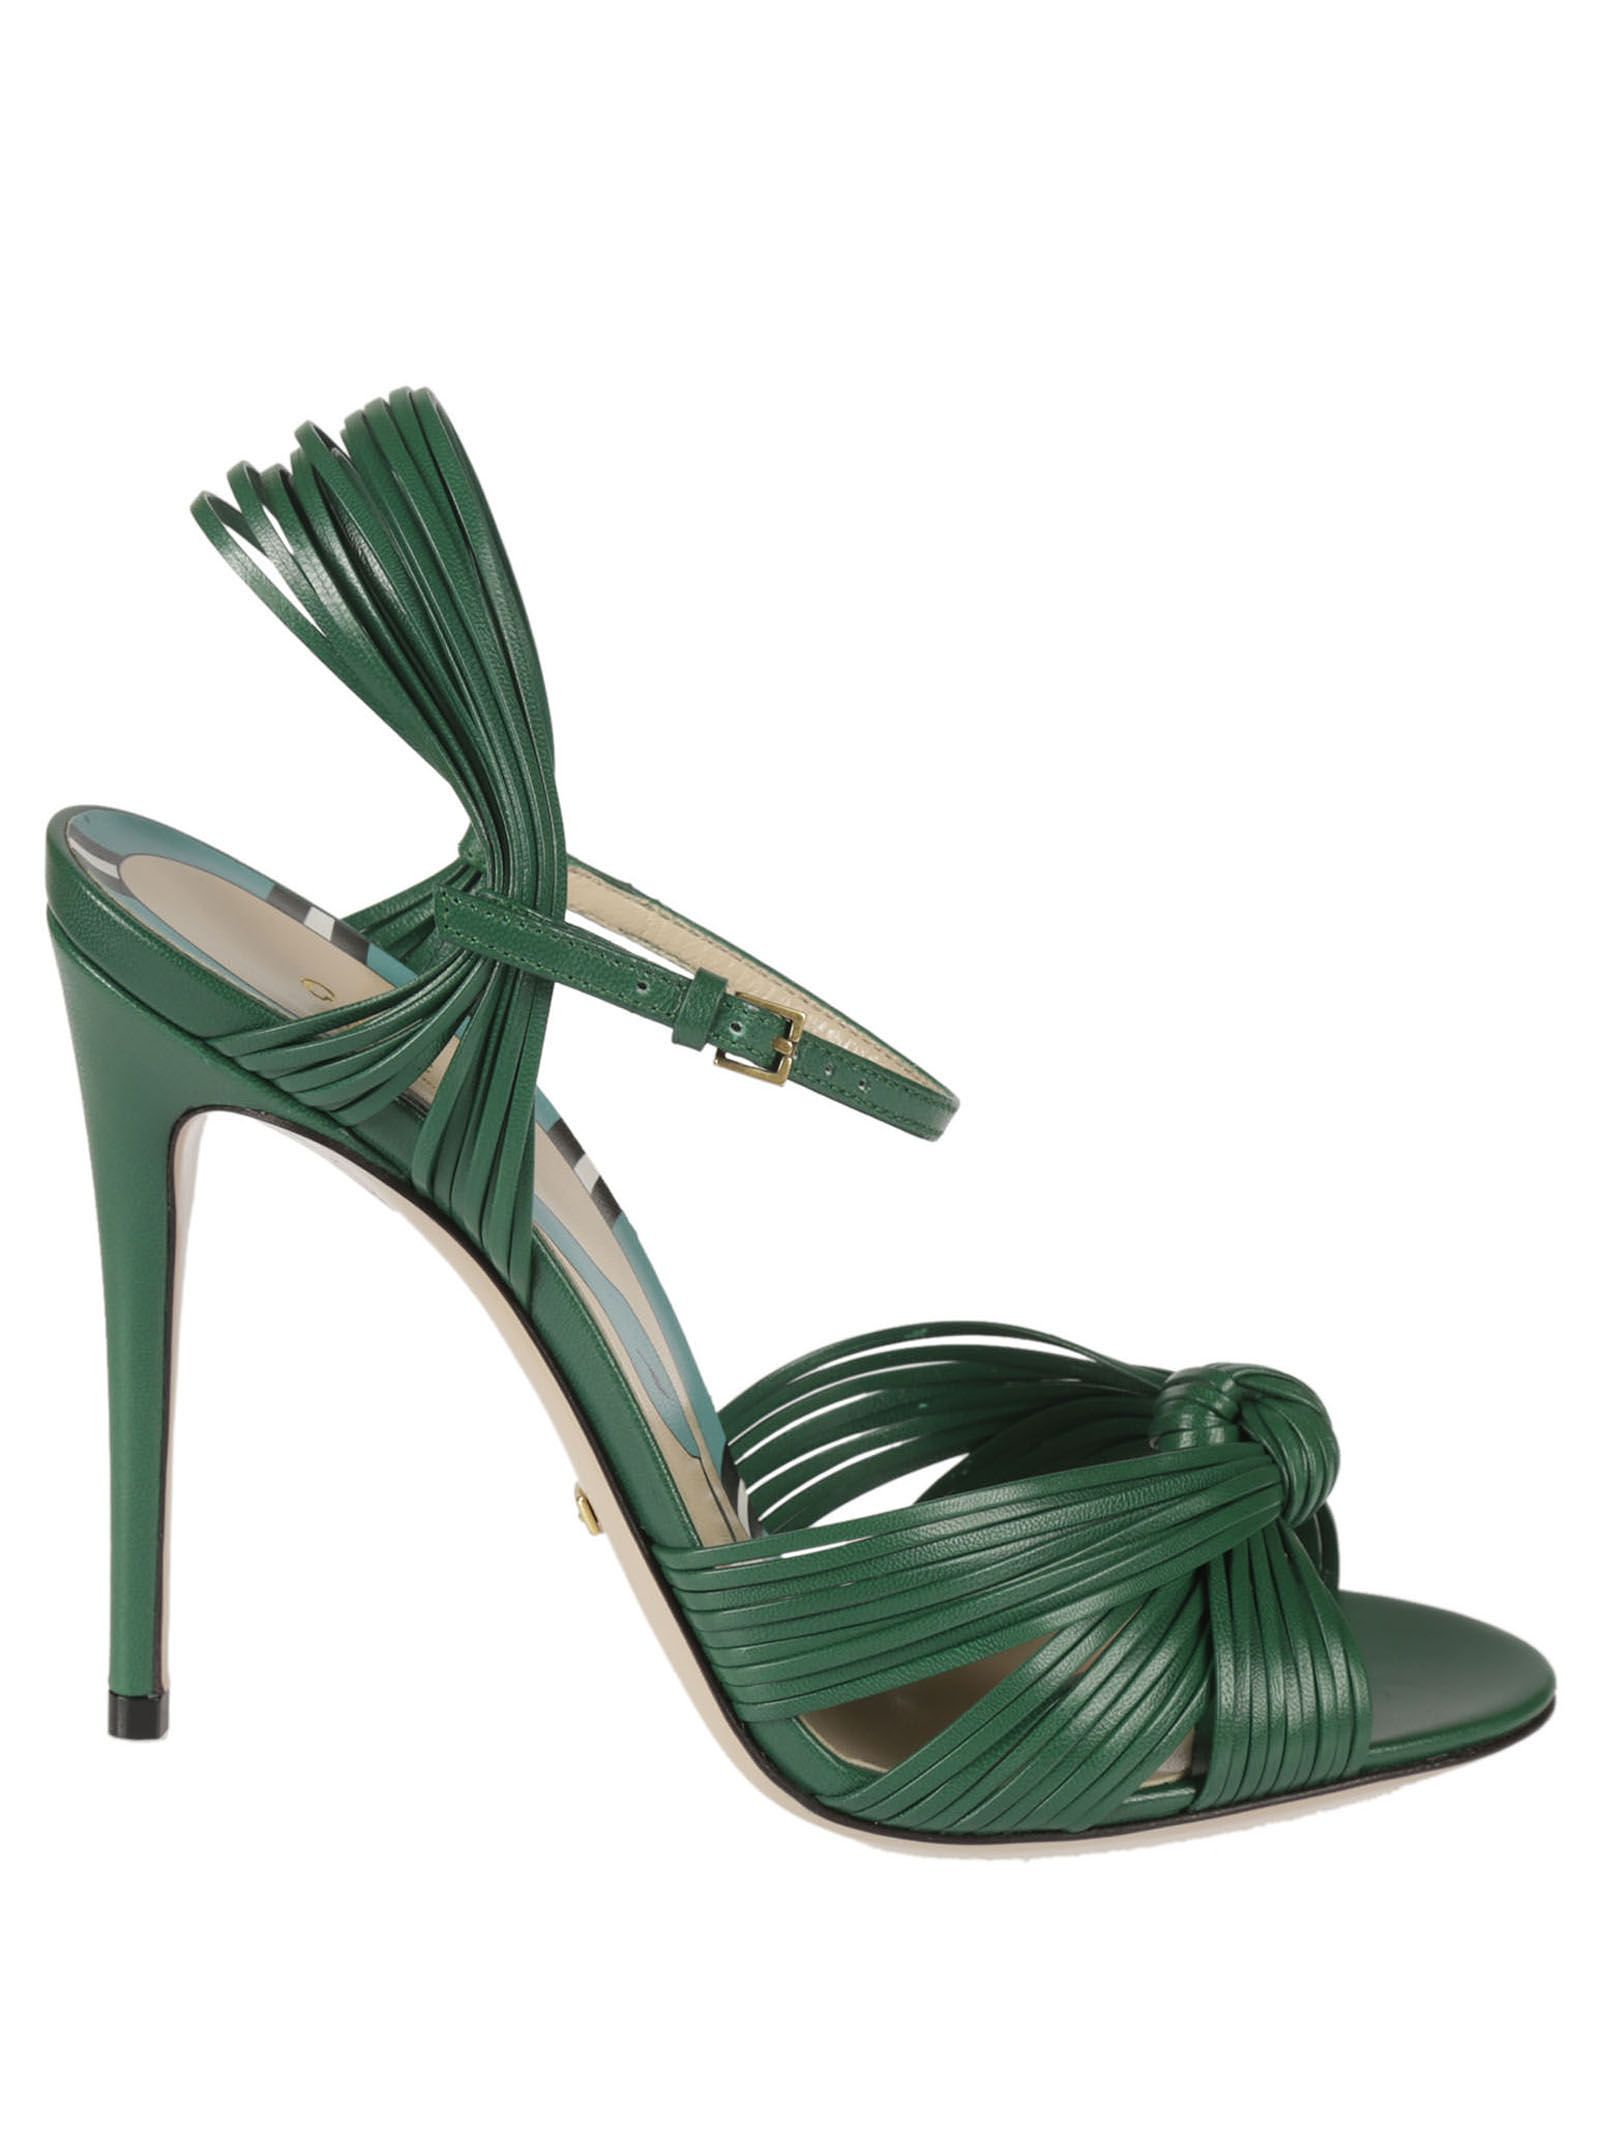 Gucci - Gucci Leather Knot Sandals - Green, Women's Sandals | Italist